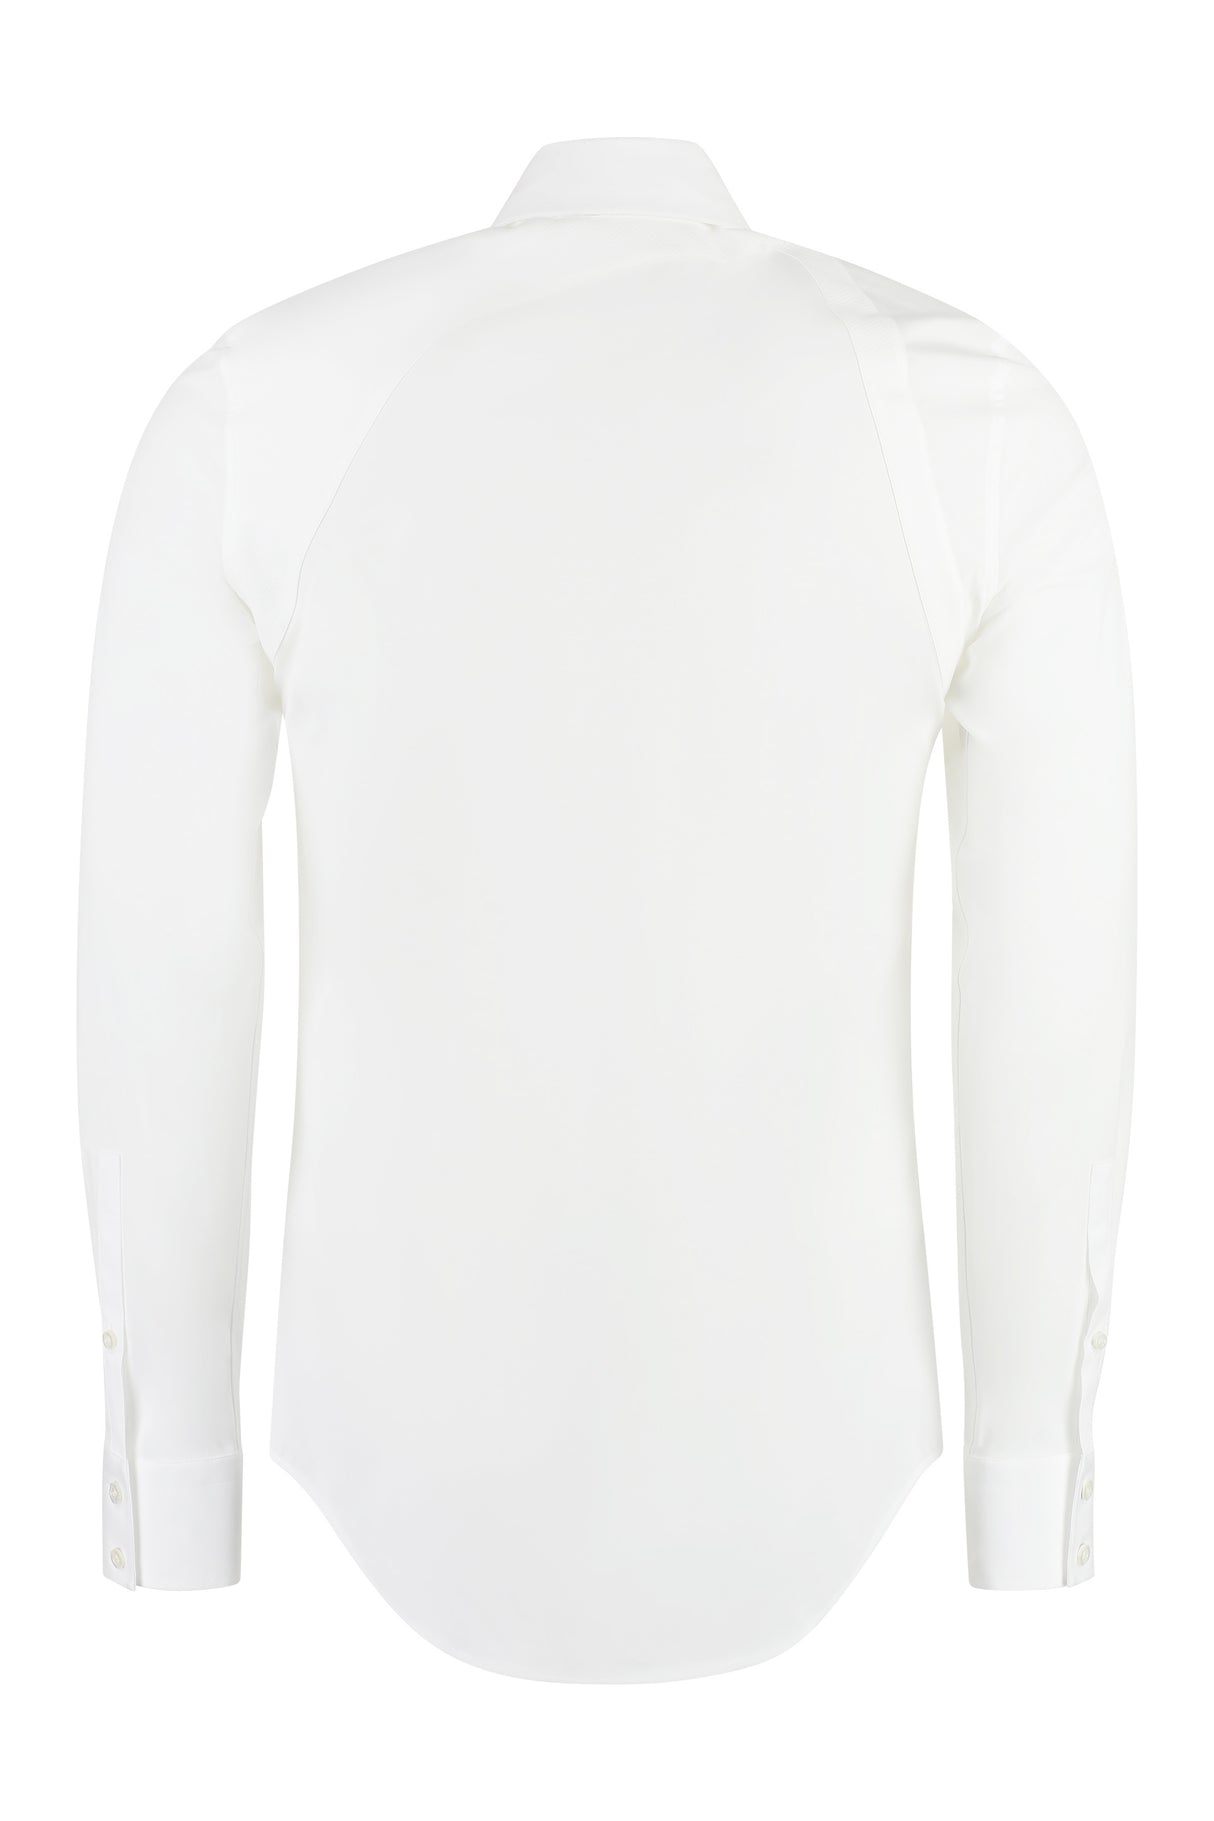 White Harness Shirt - Slim-Fit Stretch Cotton by ALEXANDER MCQUEEN for Men